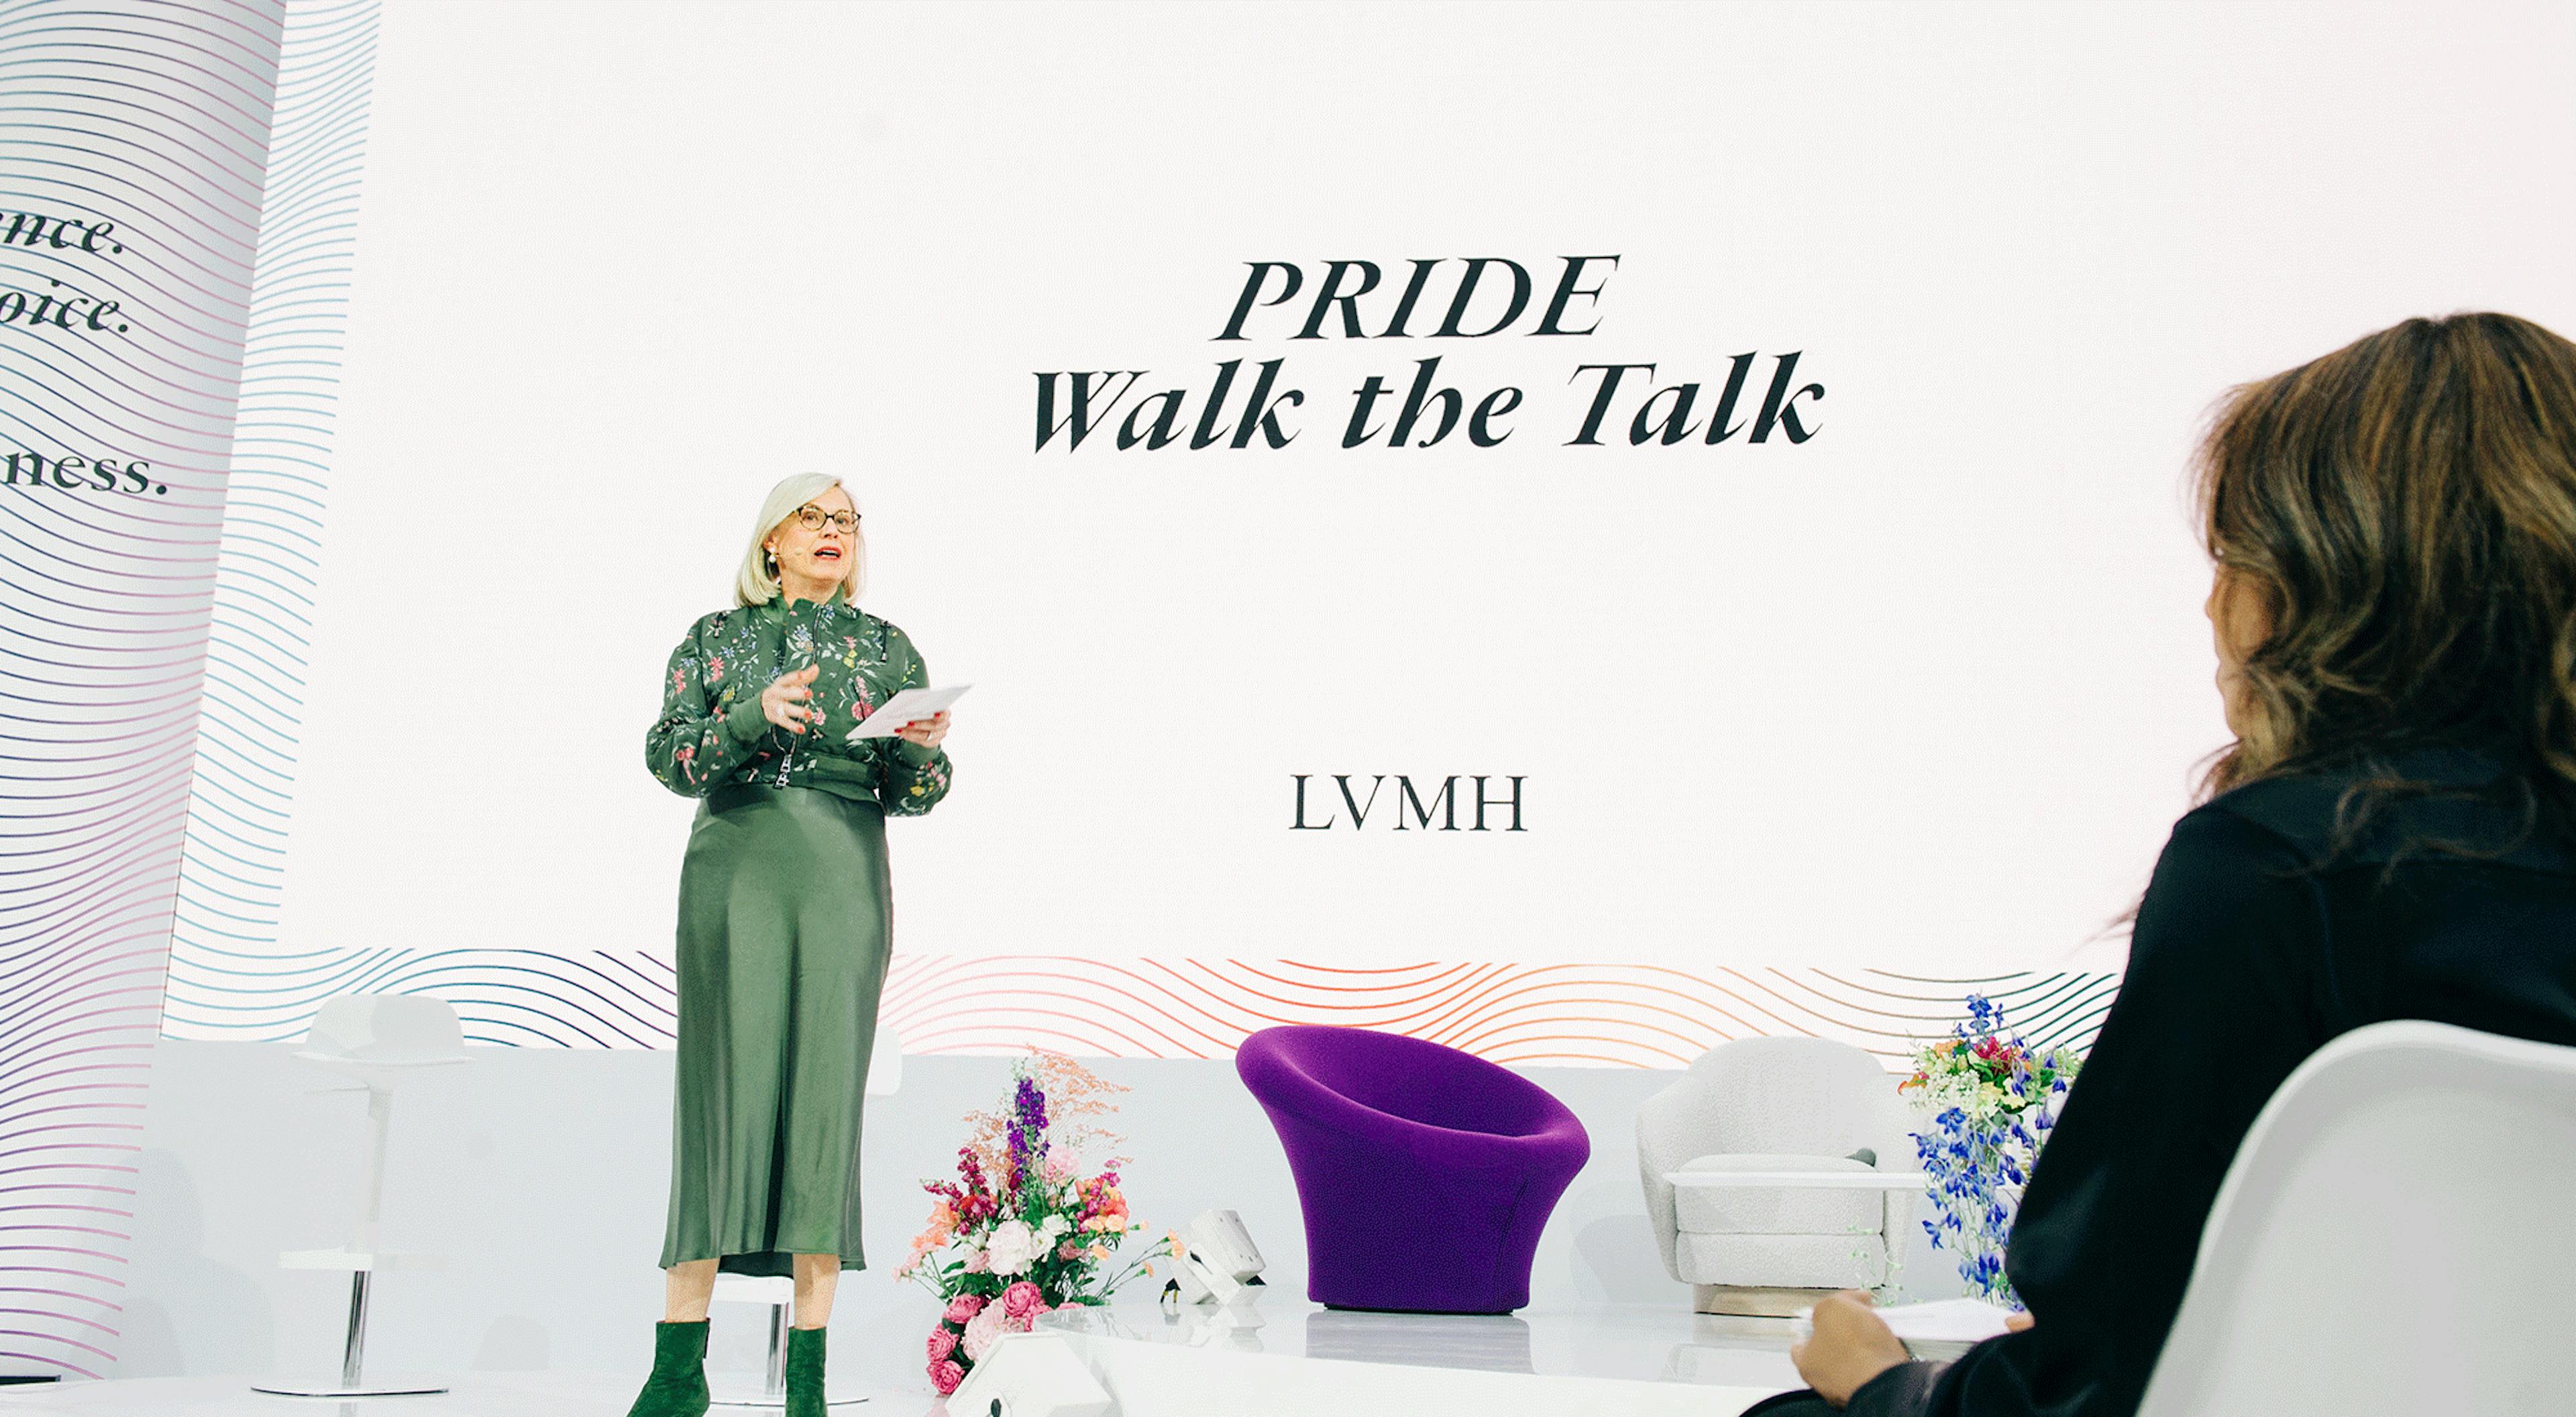 Cover - With the “Walk the Talk” event, LVMH launches Pride Month